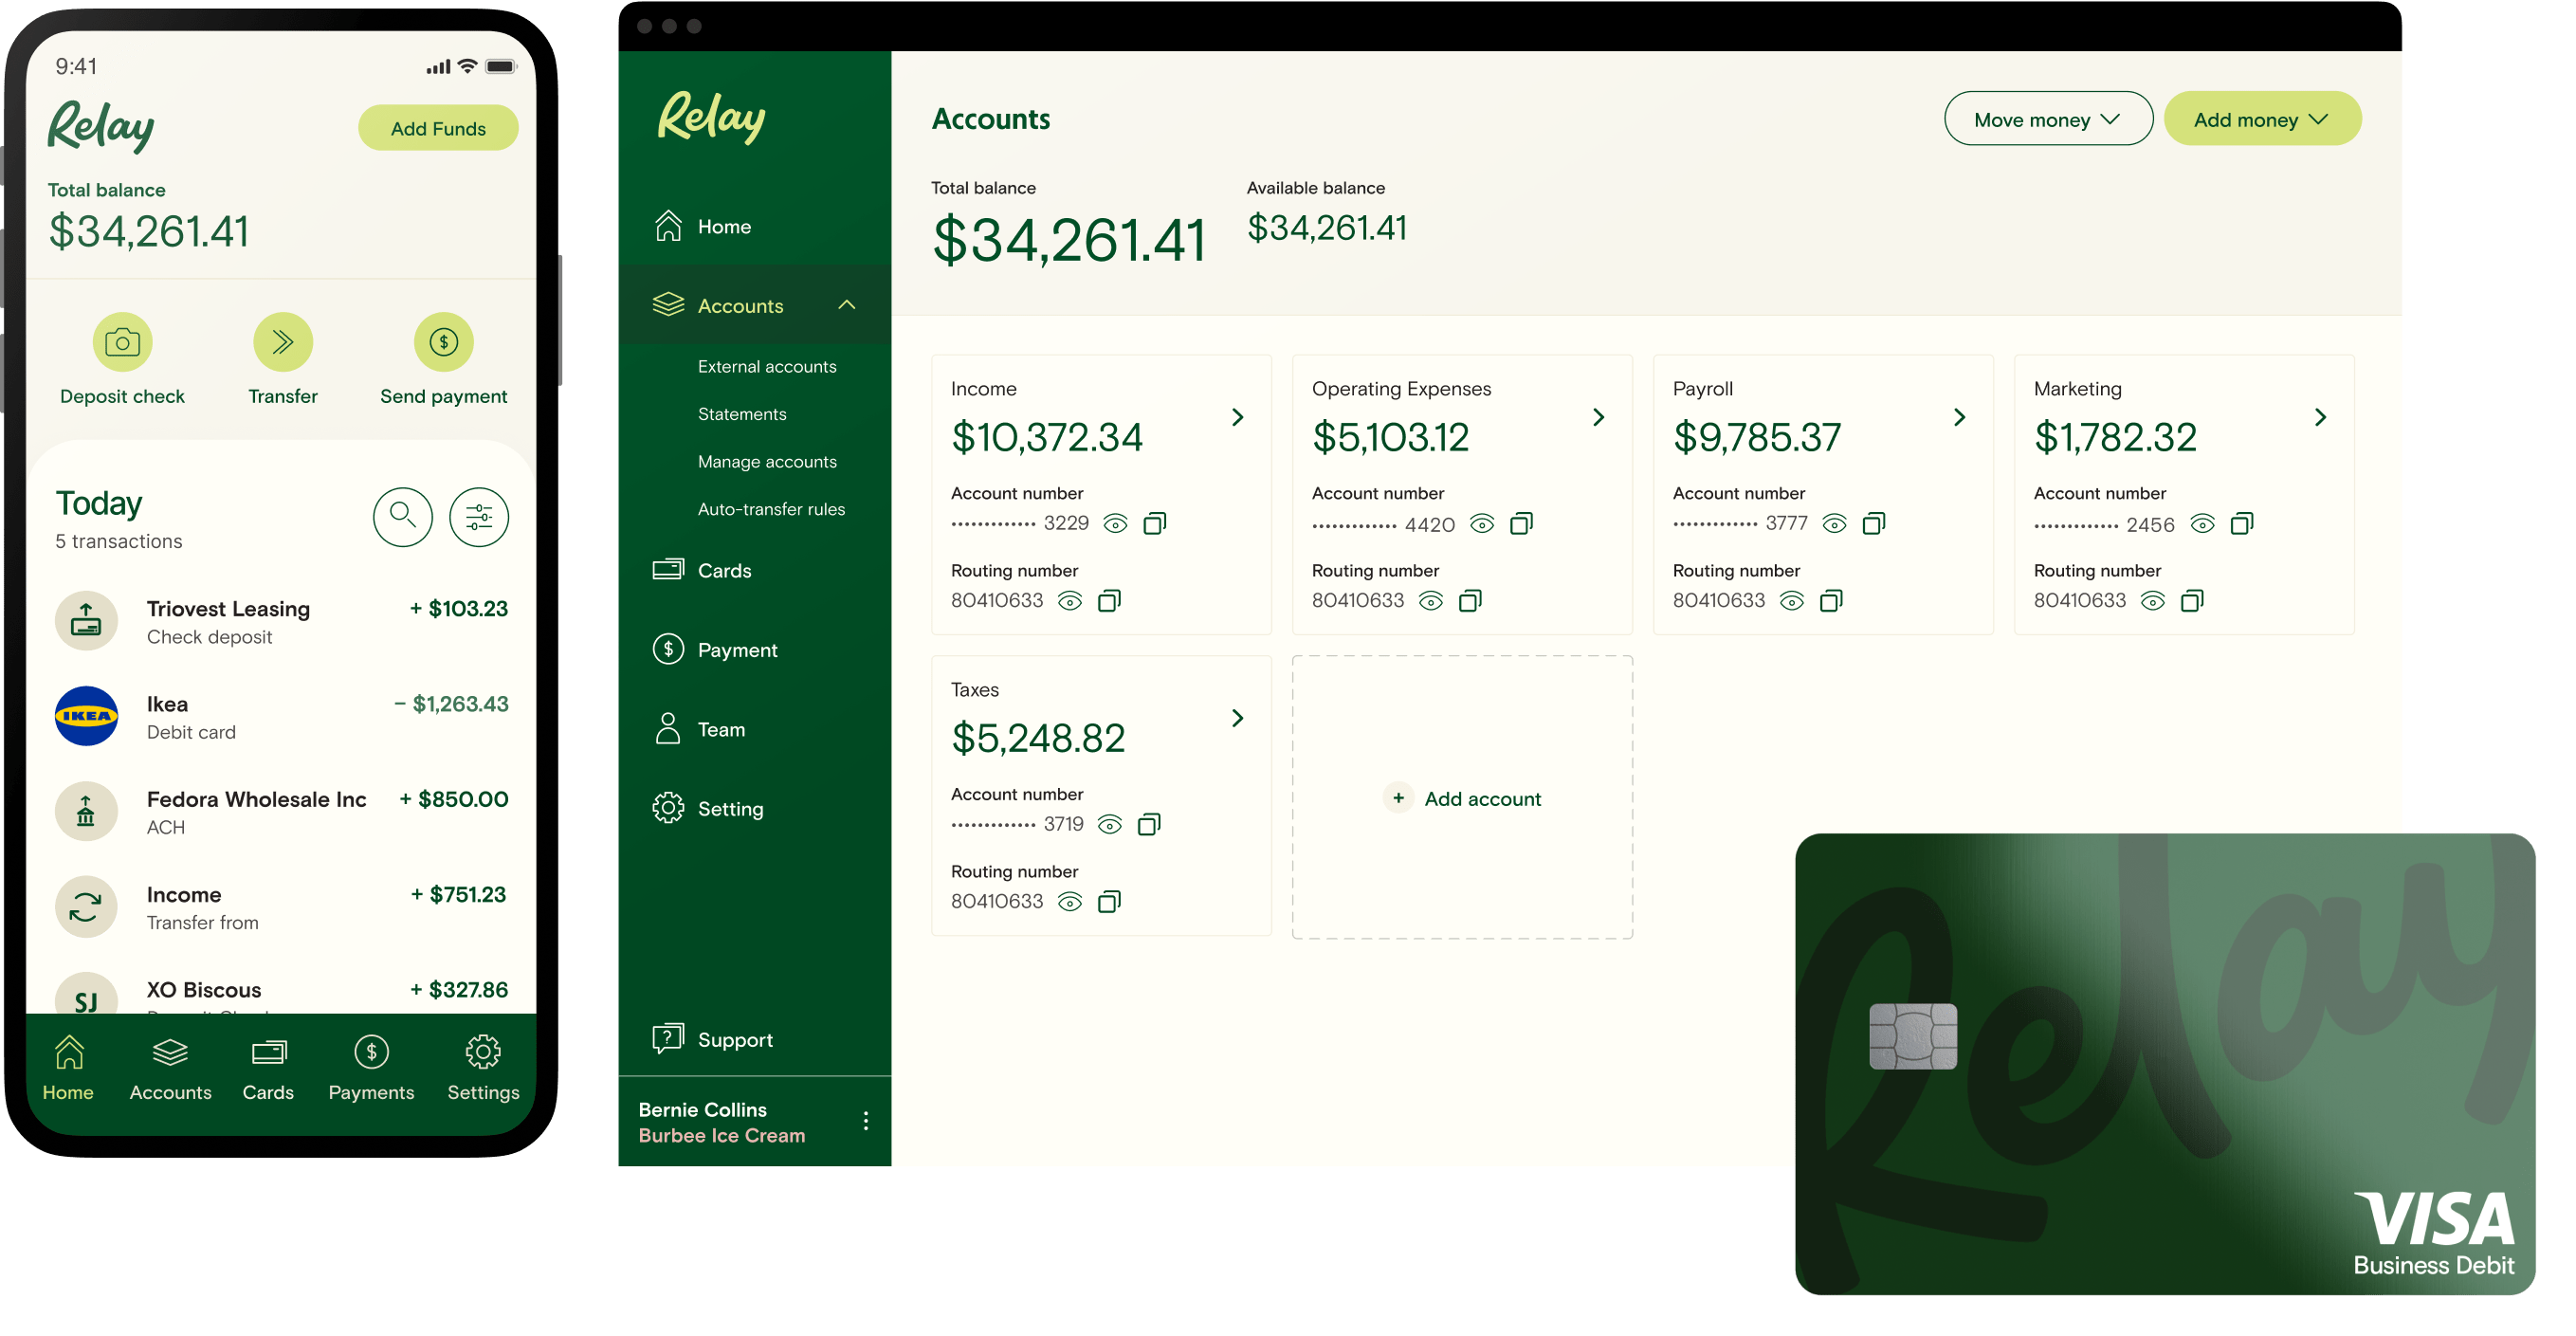 The Relay app on mobile and desktop beside a green Relay debit card.